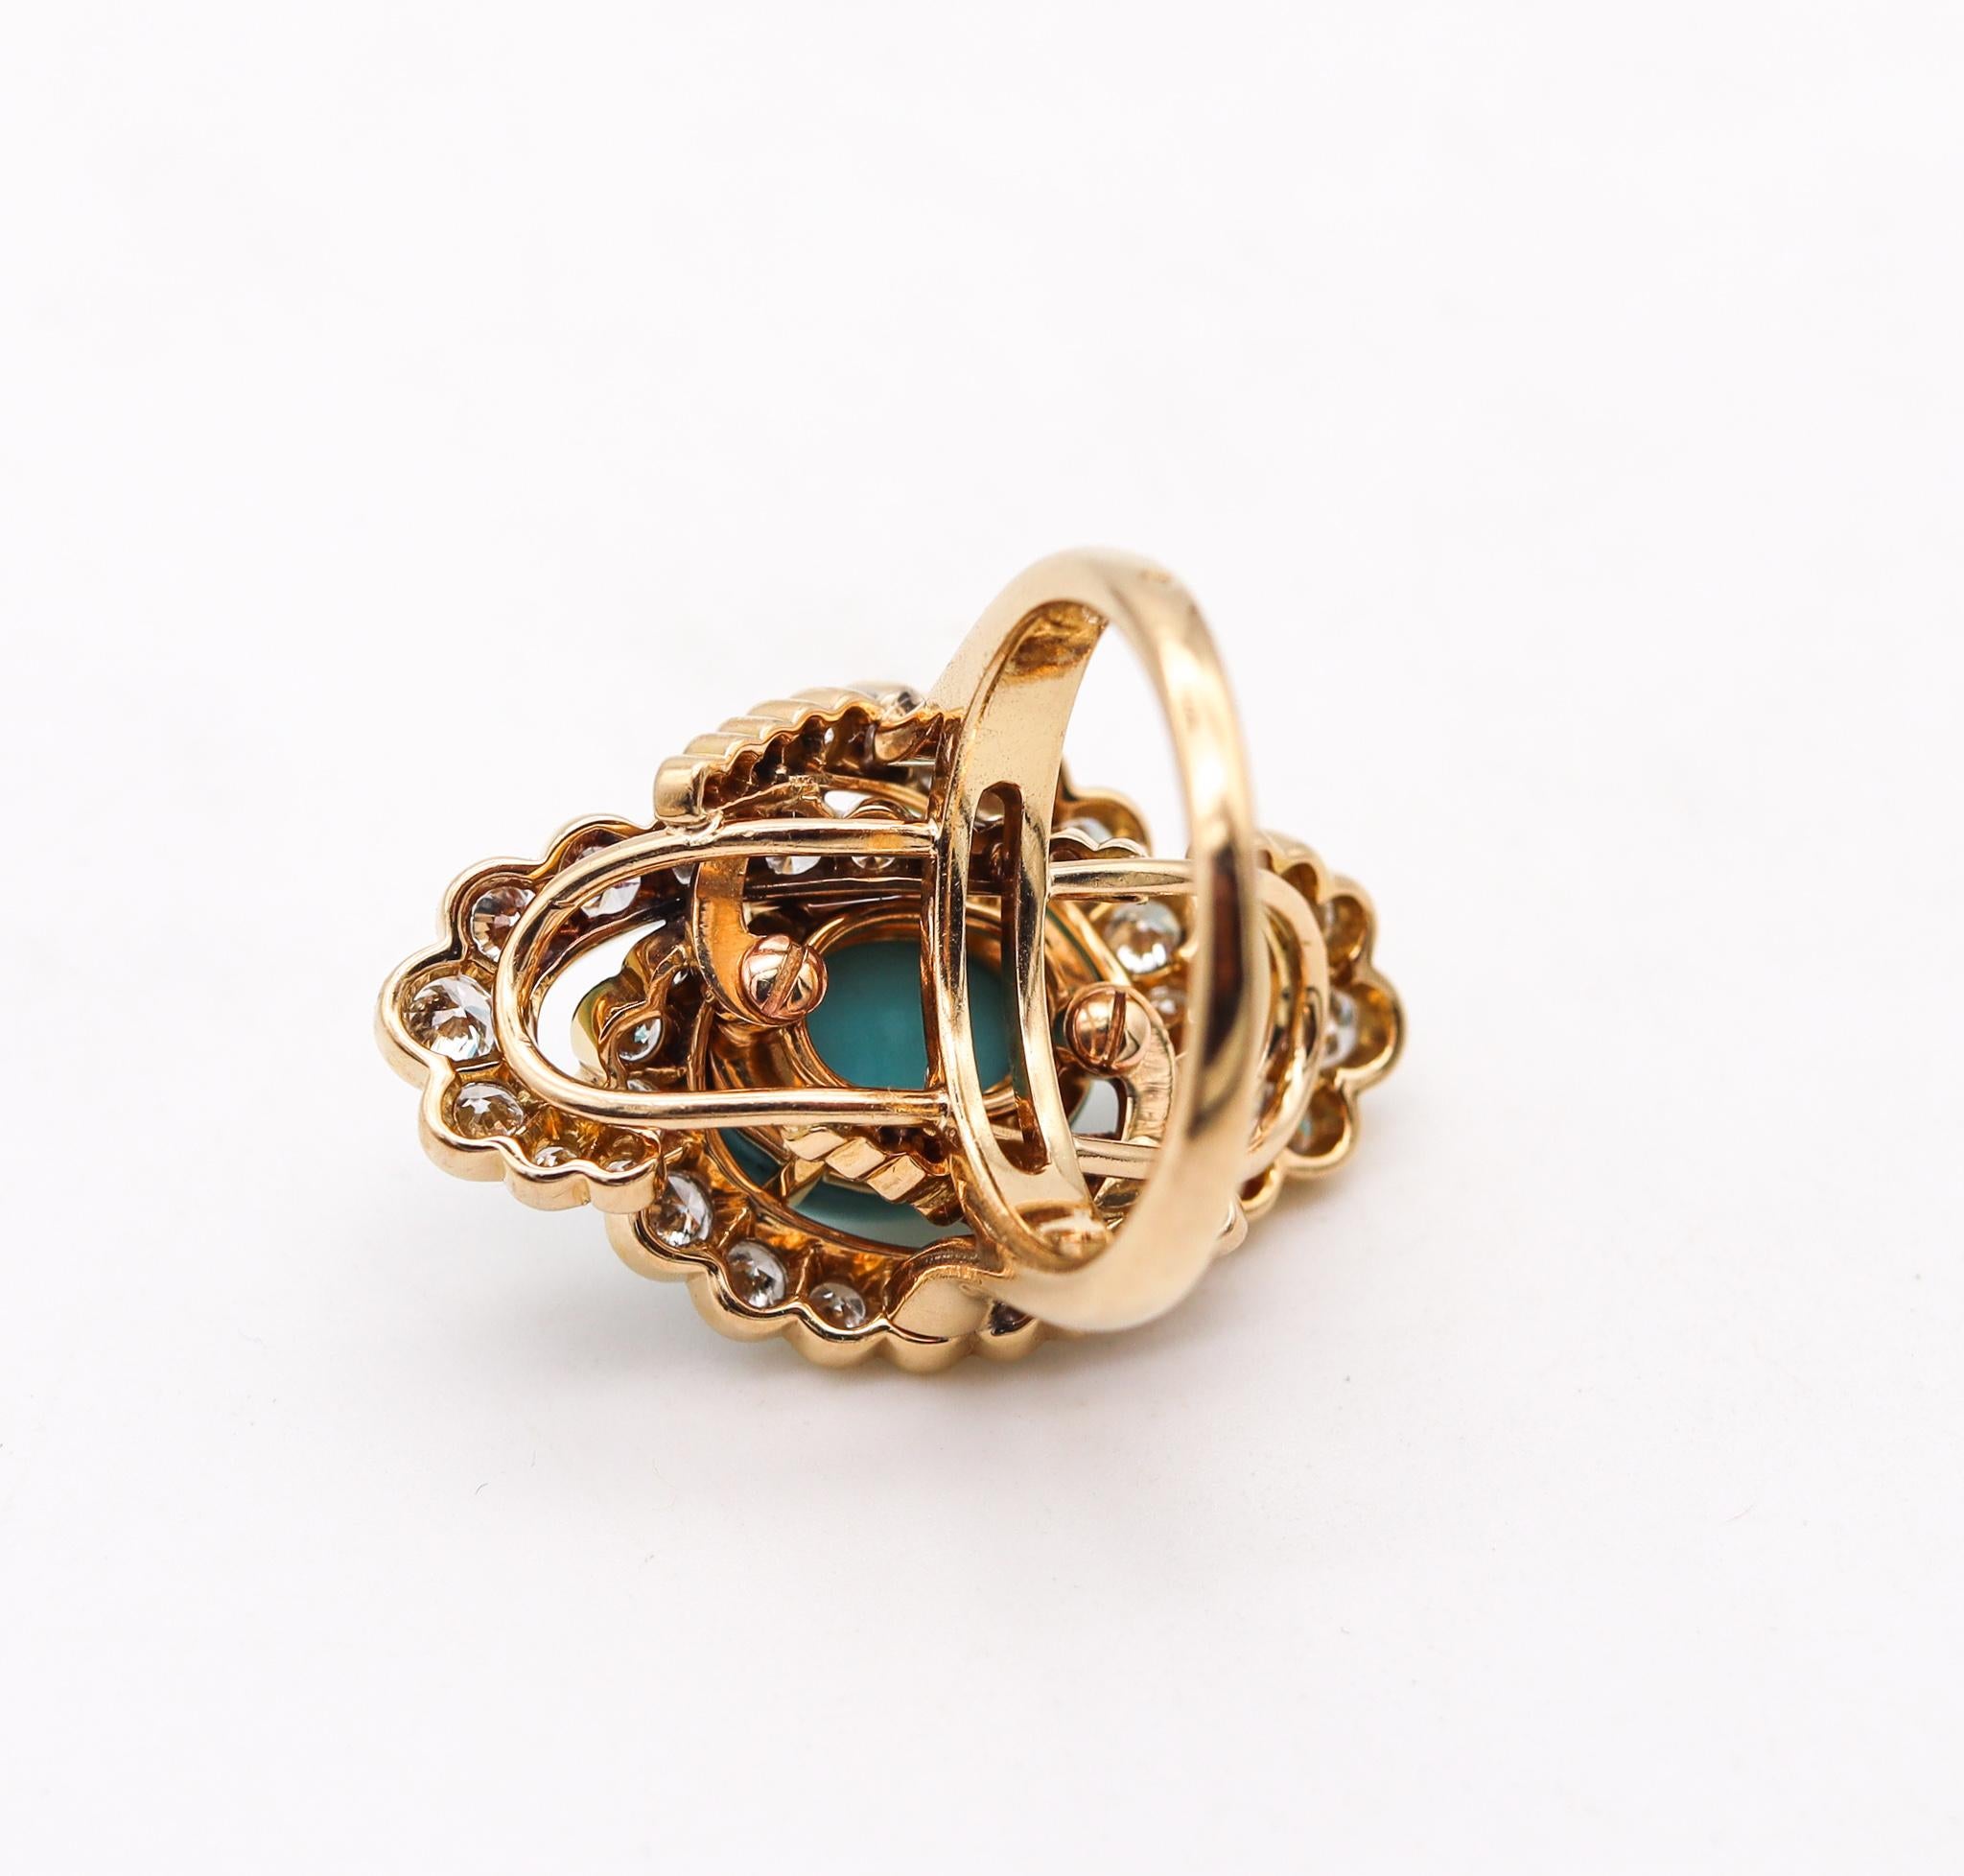 Fred Paris Gem Set Cocktail Ring 18Kt Yellow Gold 12.34 Ctw Diamonds & Turquoise In Excellent Condition For Sale In Miami, FL